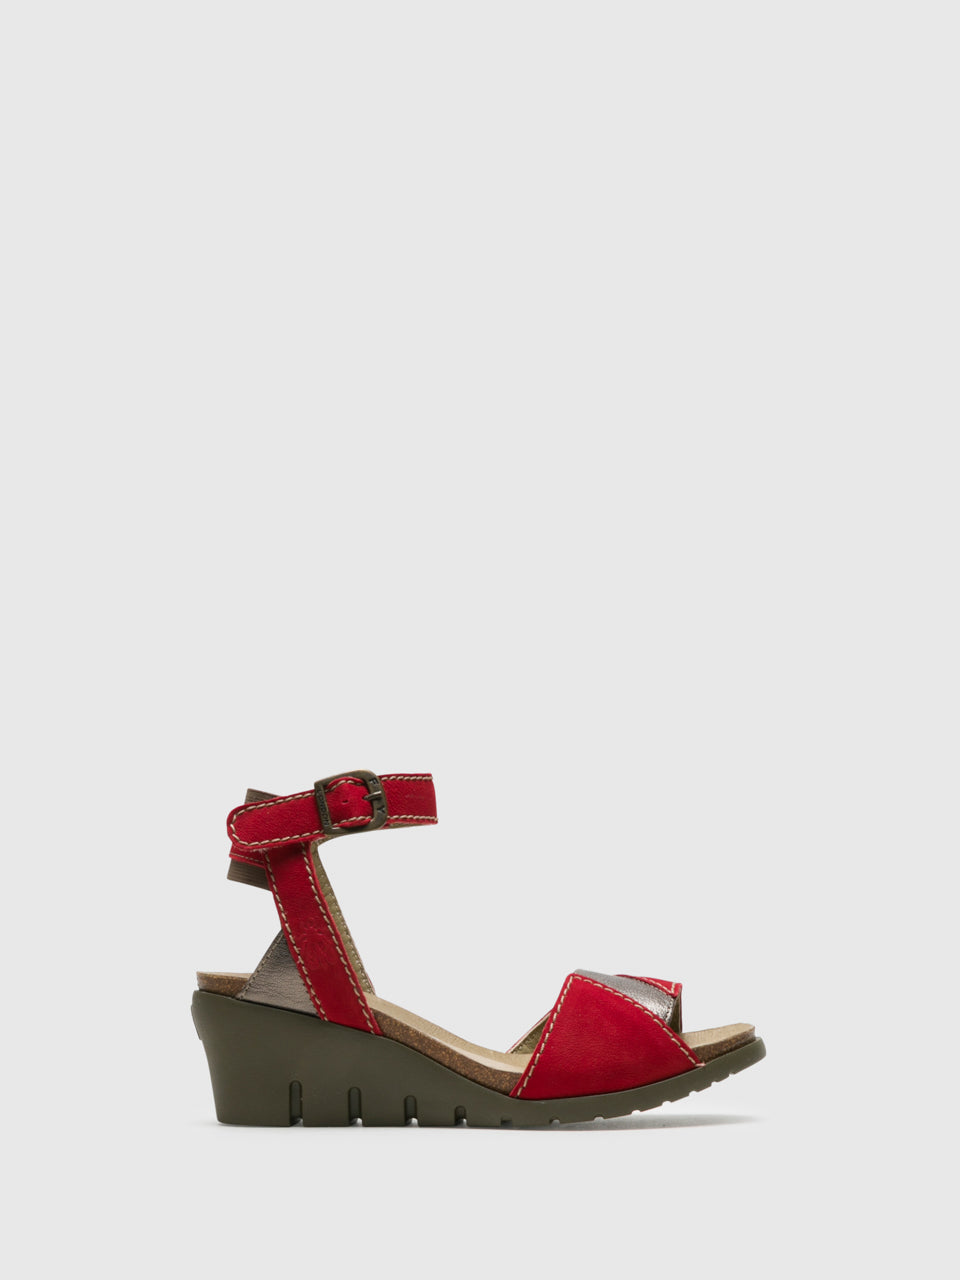 Fly London Red Ankle Strap Sandals